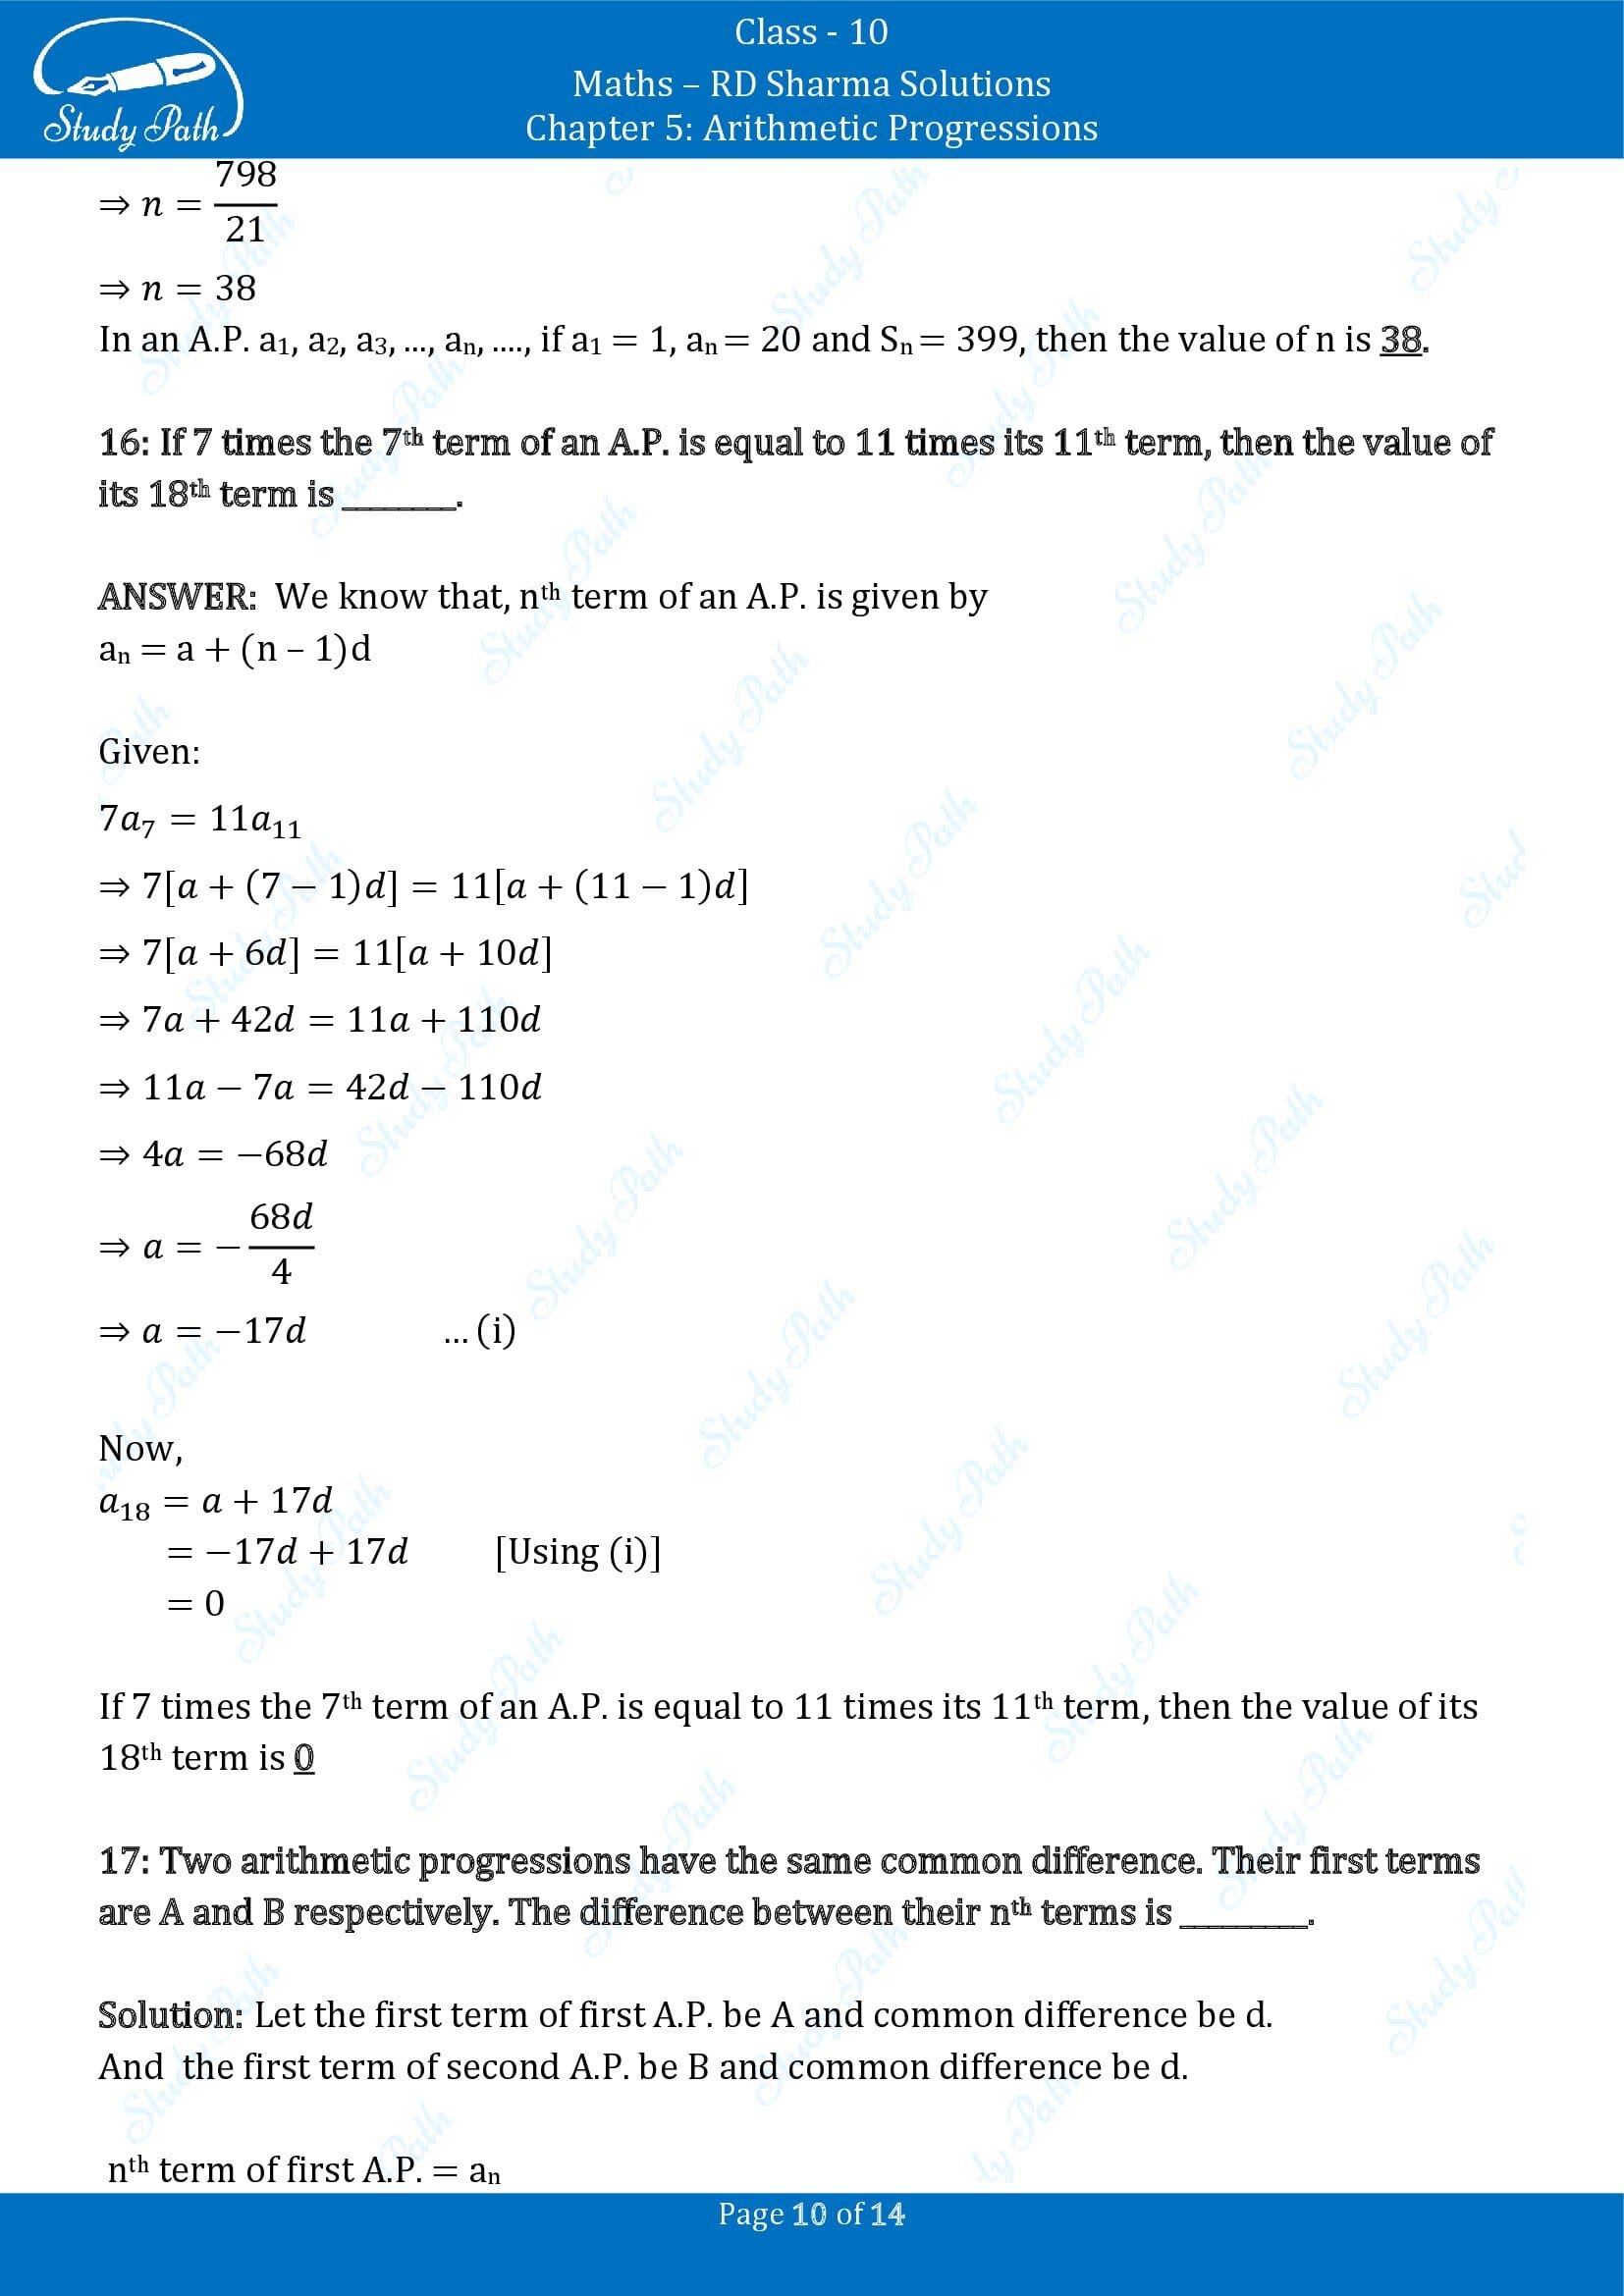 RD Sharma Solutions Class 10 Chapter 5 Arithmetic Progressions Fill in the Blank Type Questions FBQs 00010